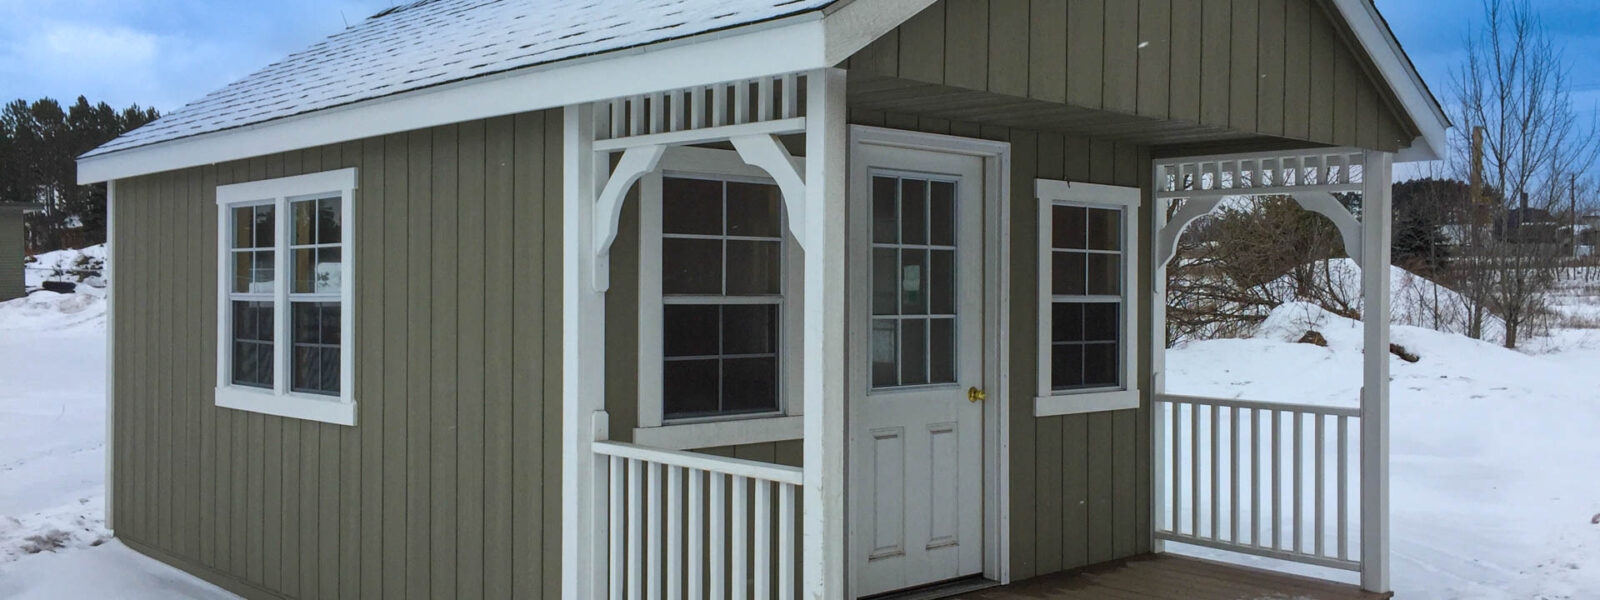 Cabin sheds for sale in Rochester, MN